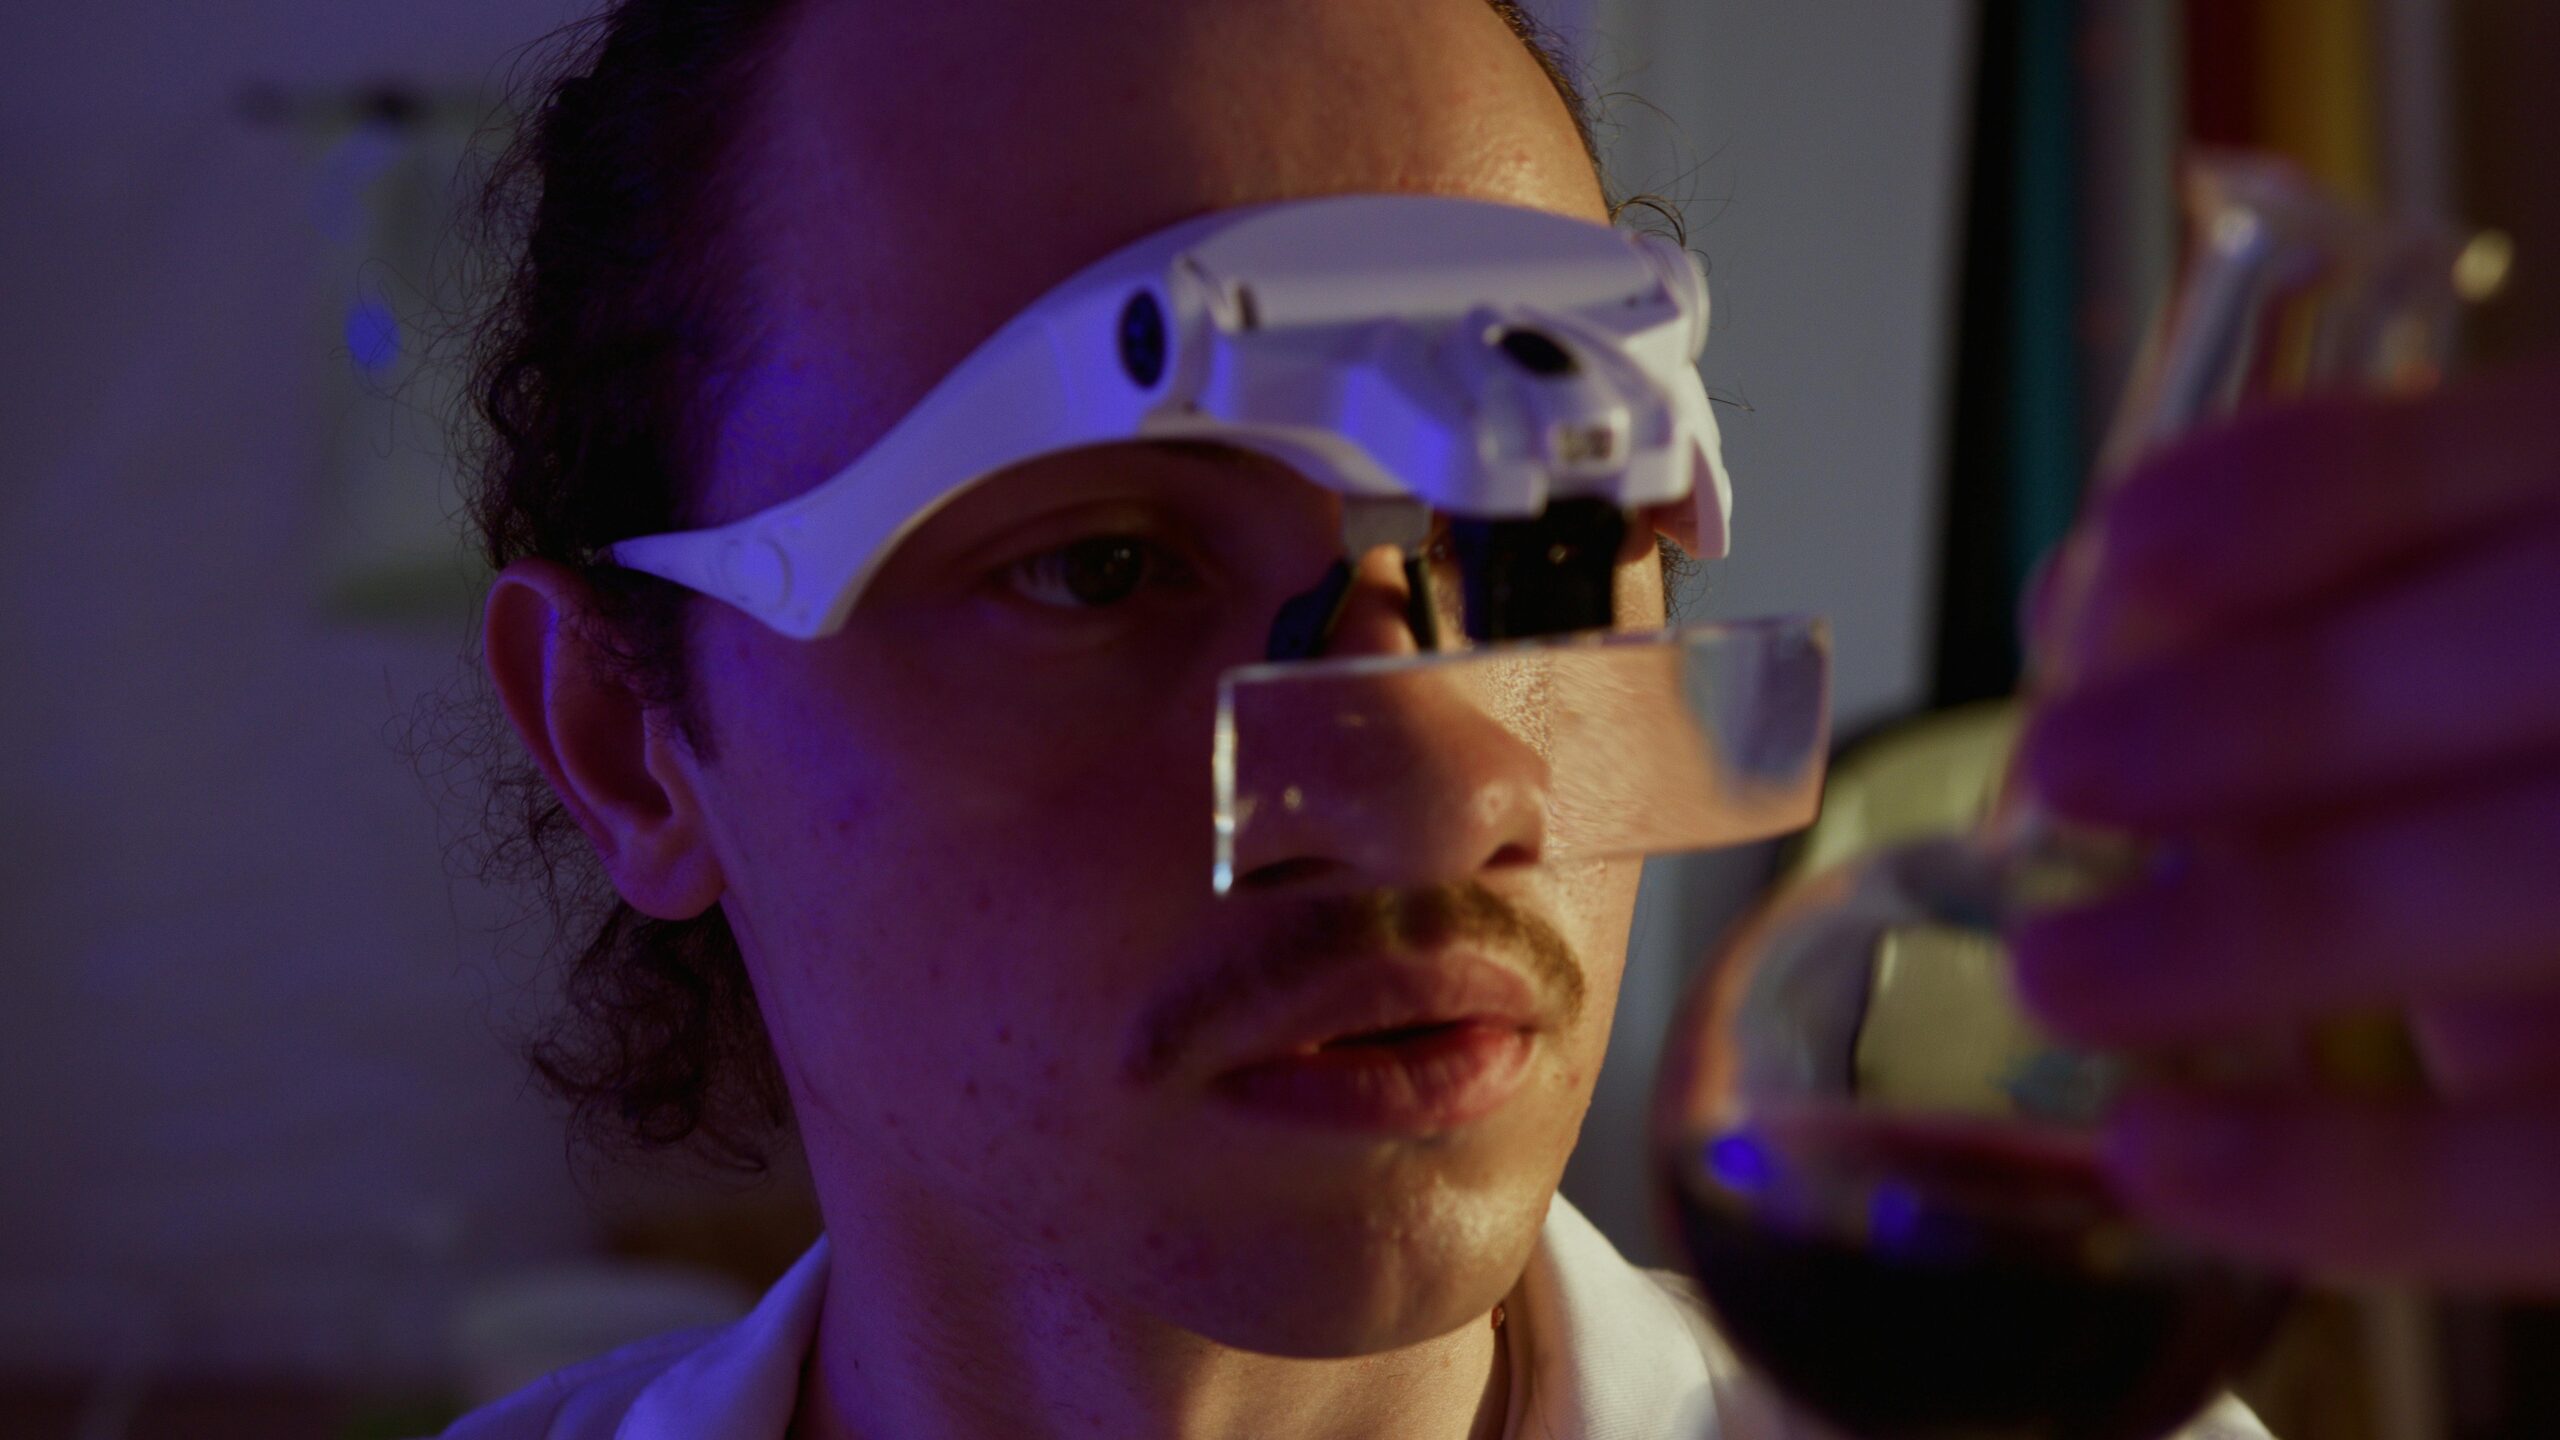 A close-up of a scientist wearing a futuristic head-mounted display and examining a glass of dark liquid, reflecting the integration of advanced technology in biotechnology.